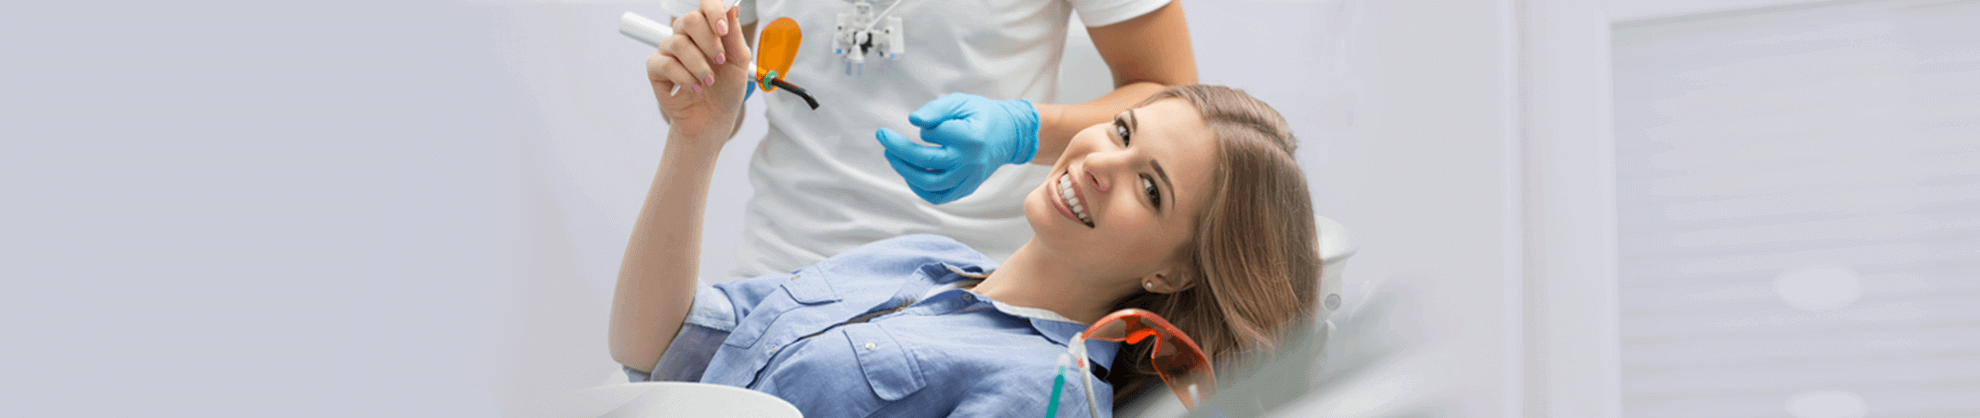 Chipped Tooth Repair in Sacramento and Elk Grove, CA